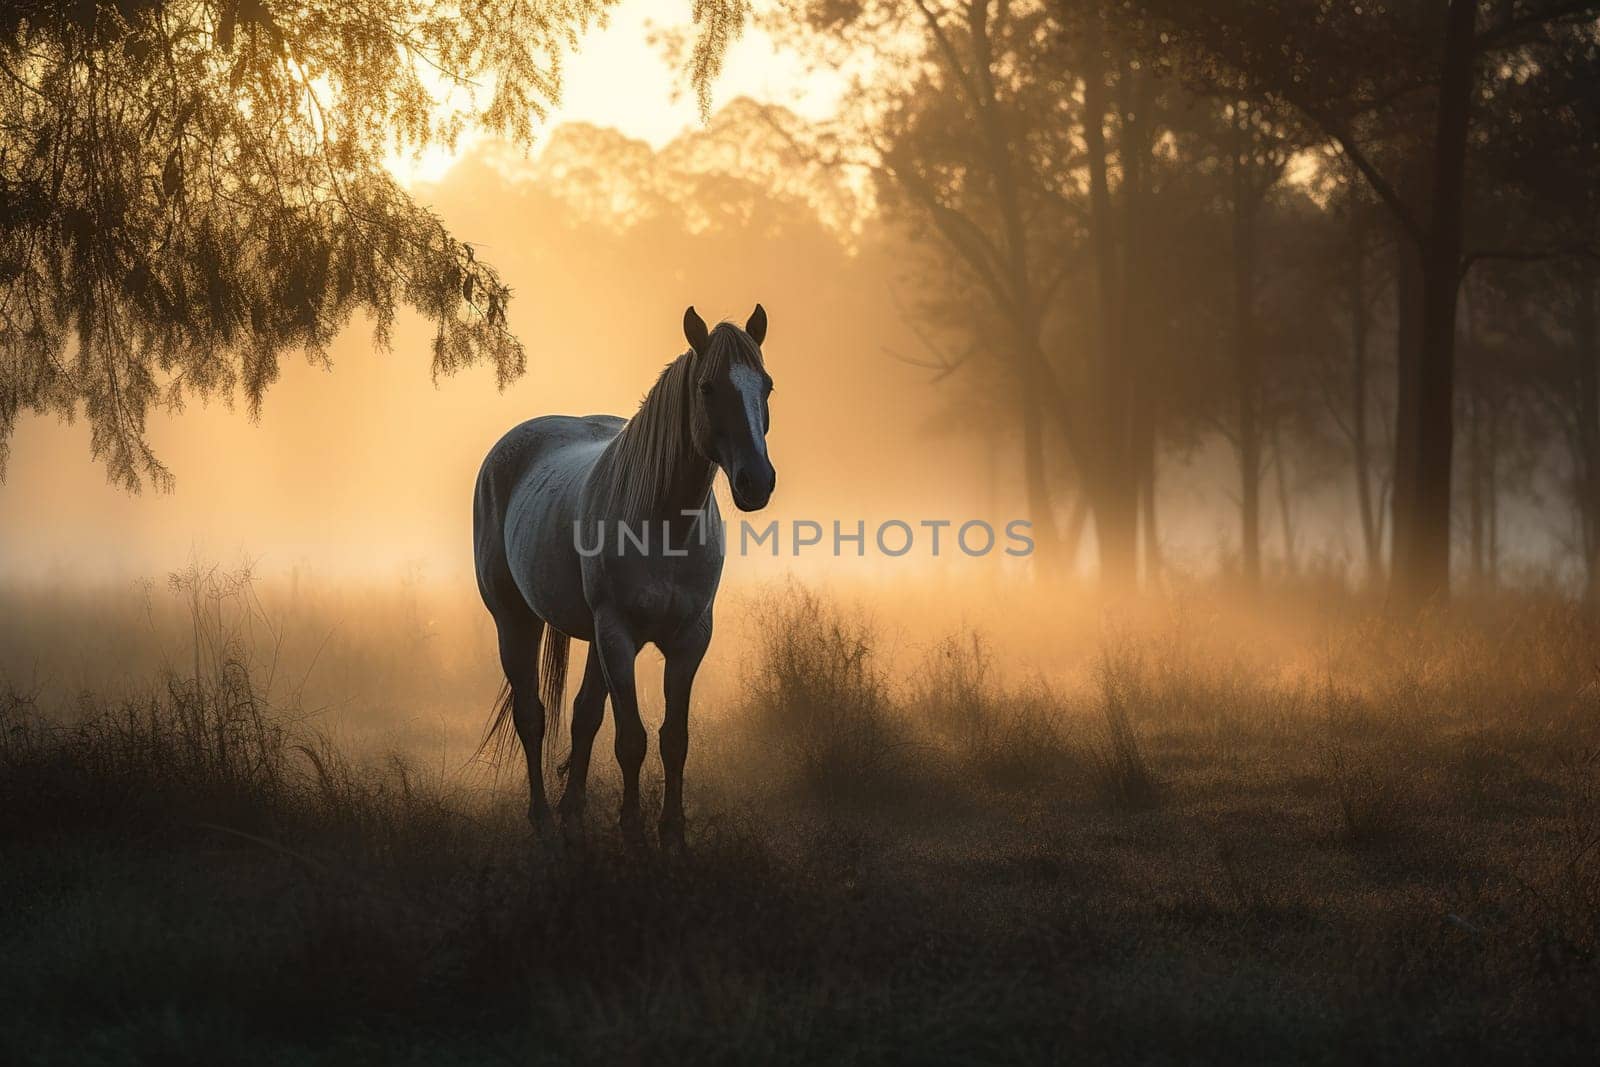 Tranquil Portrait Of Horse At Sunset Against Trees by tan4ikk1